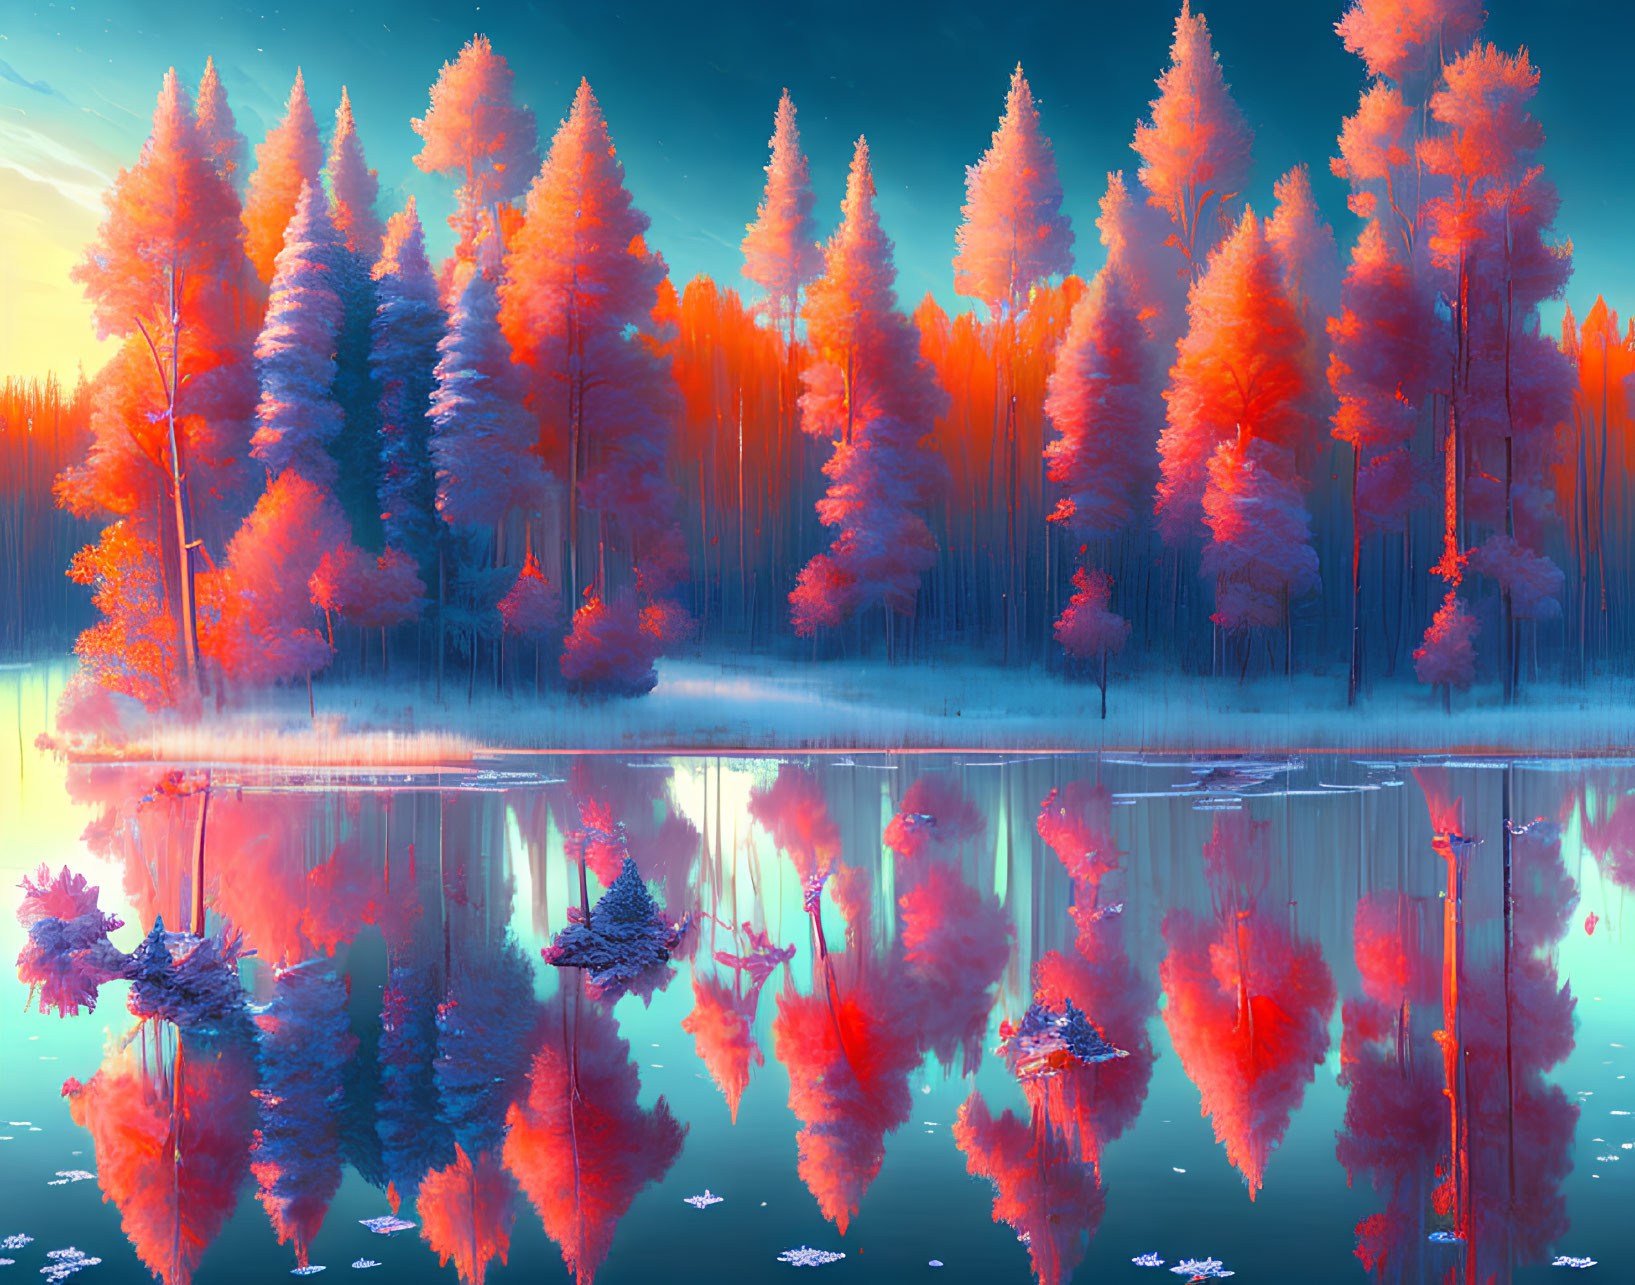 Colorful Forest Scene: Orange and Blue Hues Reflecting on Tranquil Lake